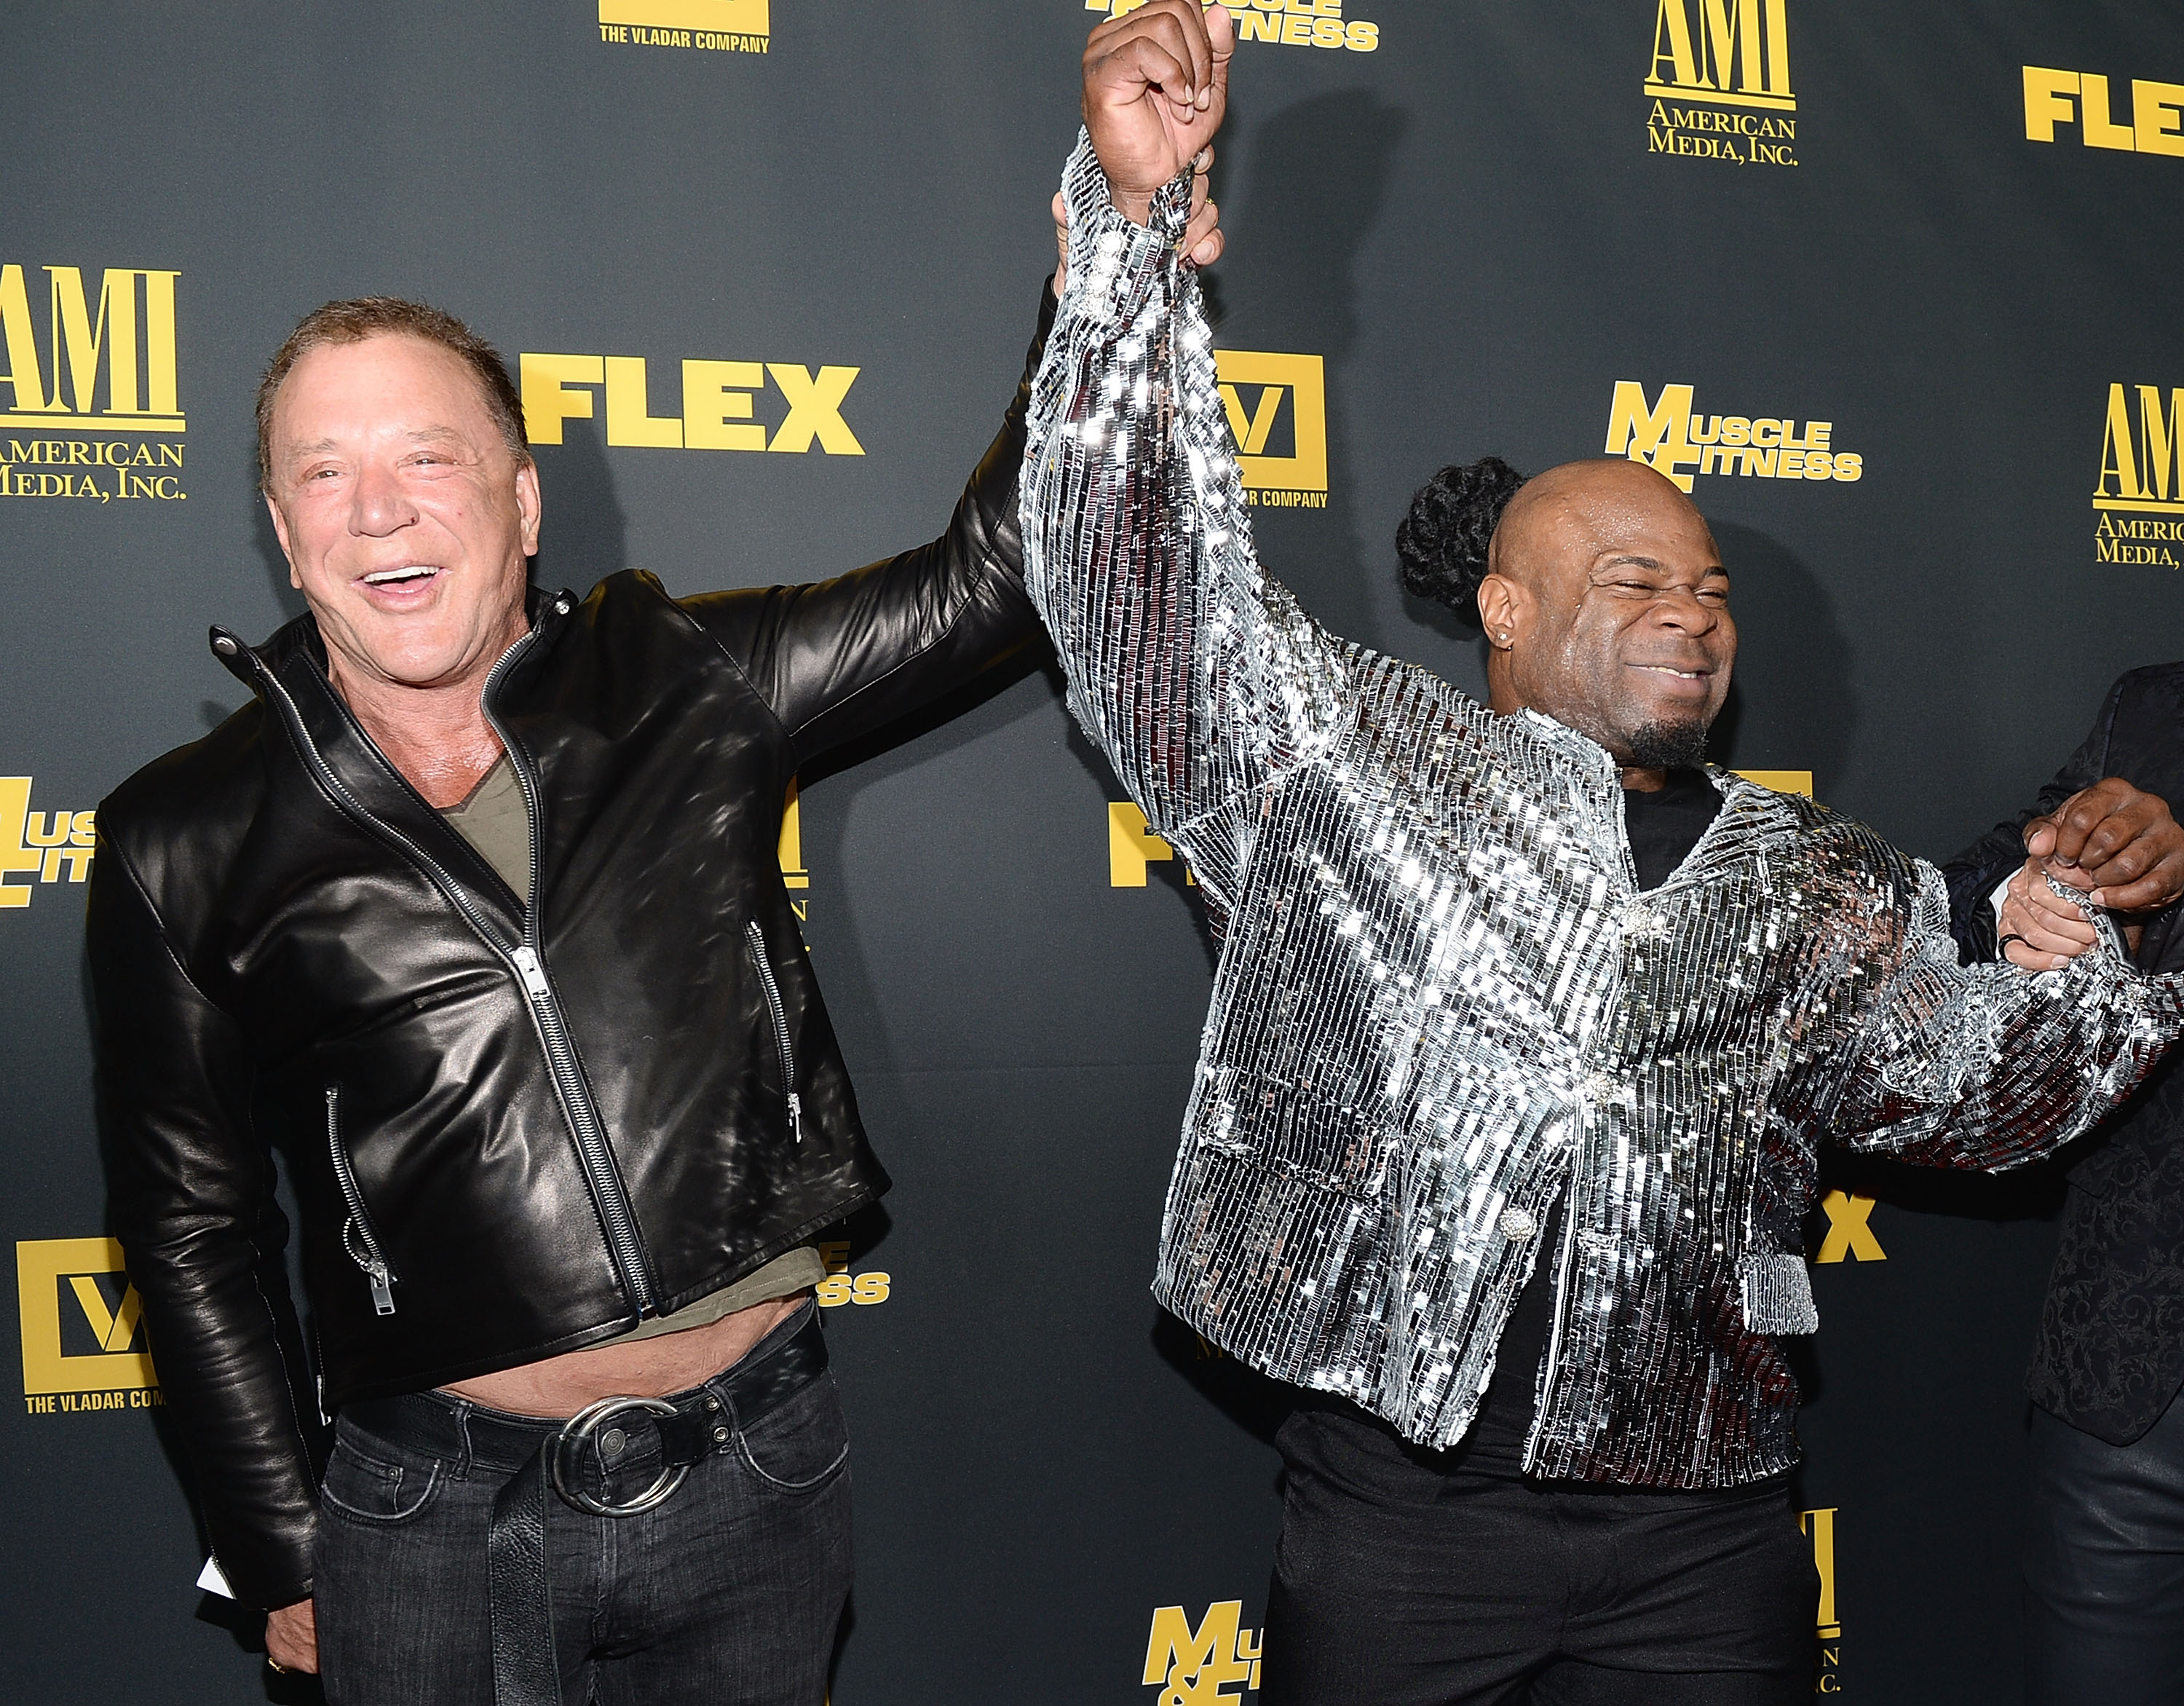 Mickey Rourke & Kai Green - Los Angeles Premiere Of "GENERATION IRON" From The Producer Of Pumping Iron